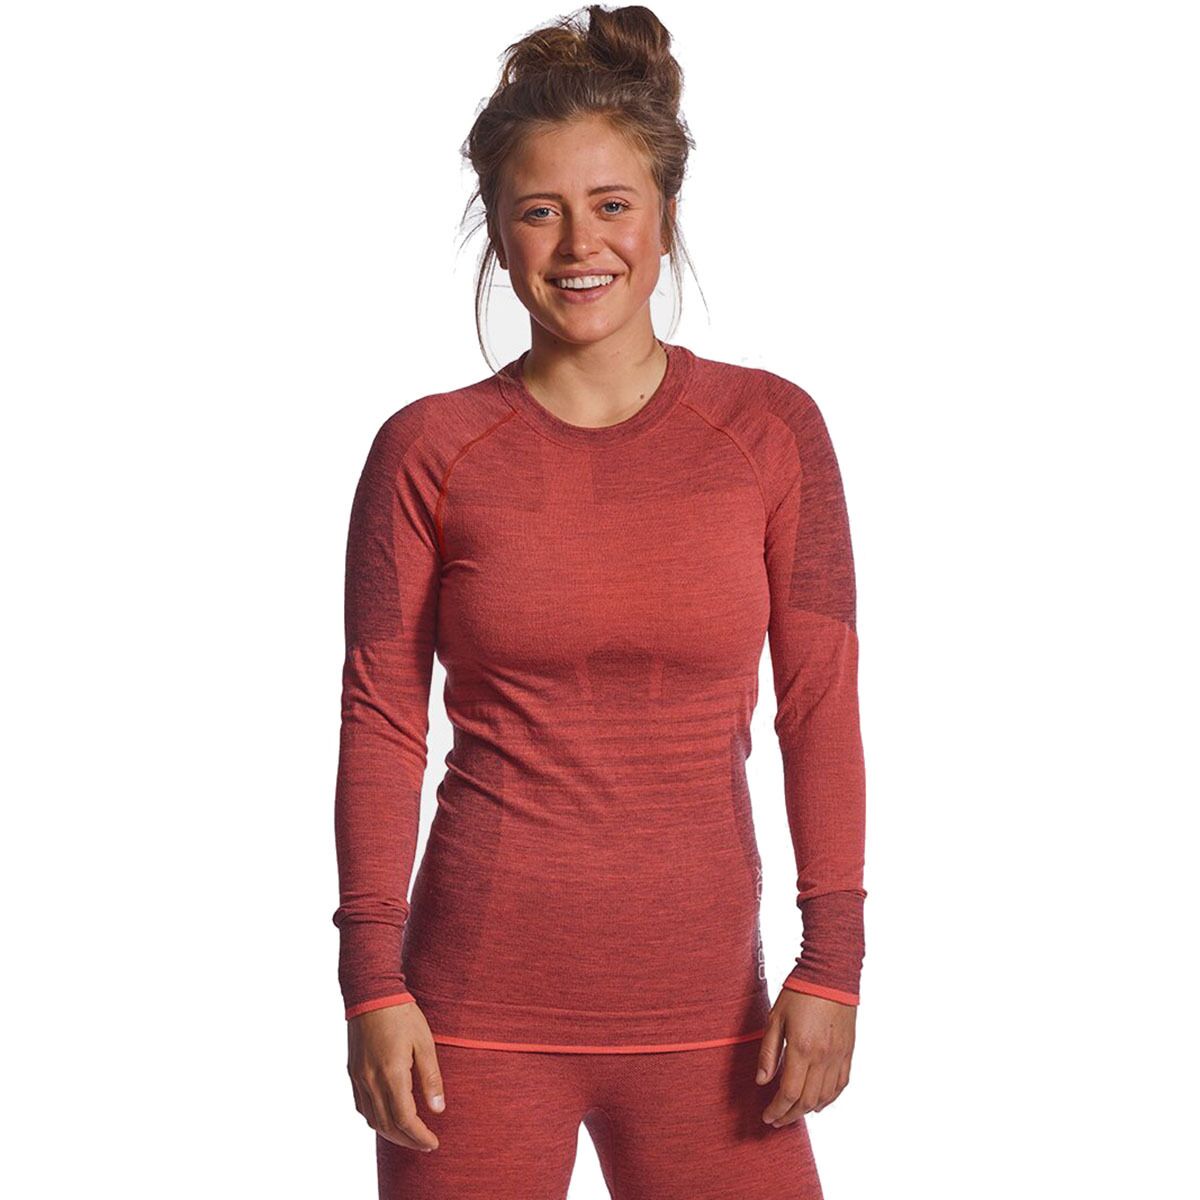 230 Competition Long-Sleeve Top - Women